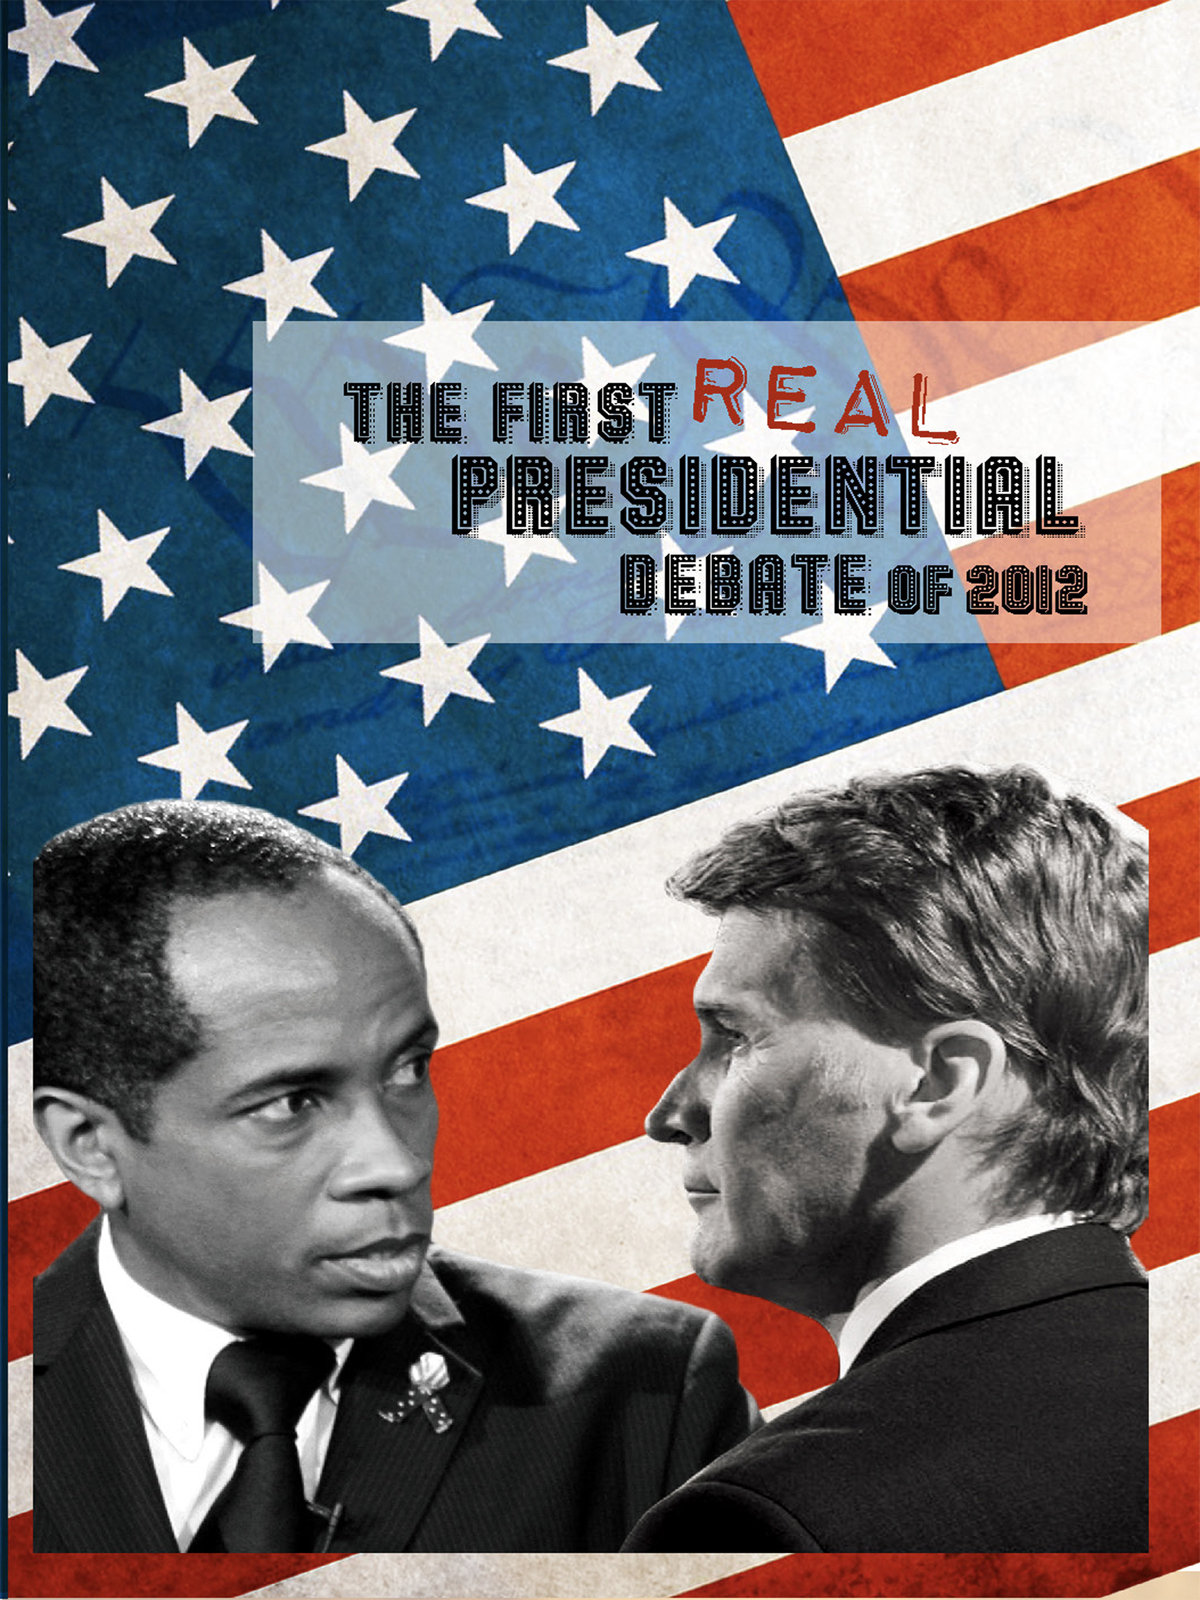 Poster for The First REAL Presidential Debate